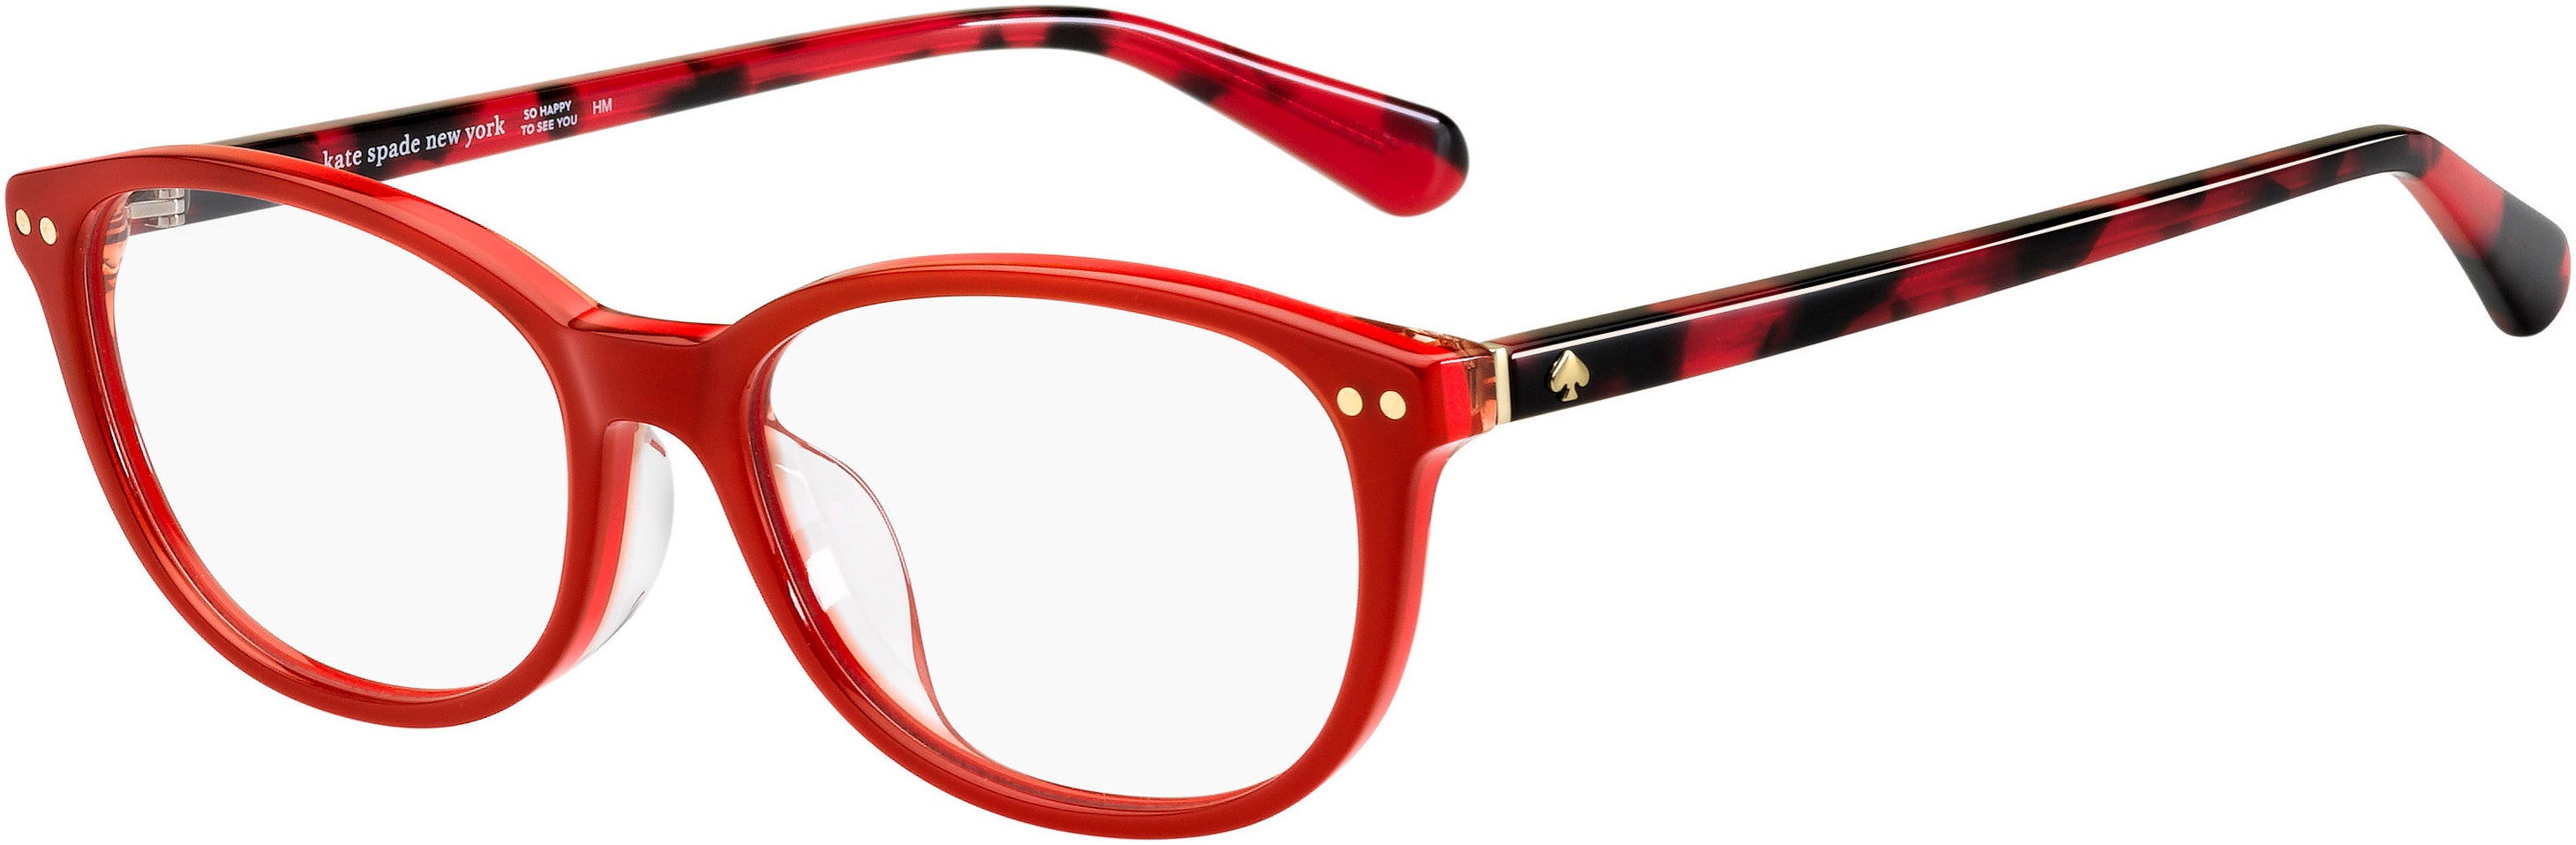 Kate Spade Evangeline/F Oval Modified Eyeglasses 0C9A-0C9A  Red (00 Demo Lens)